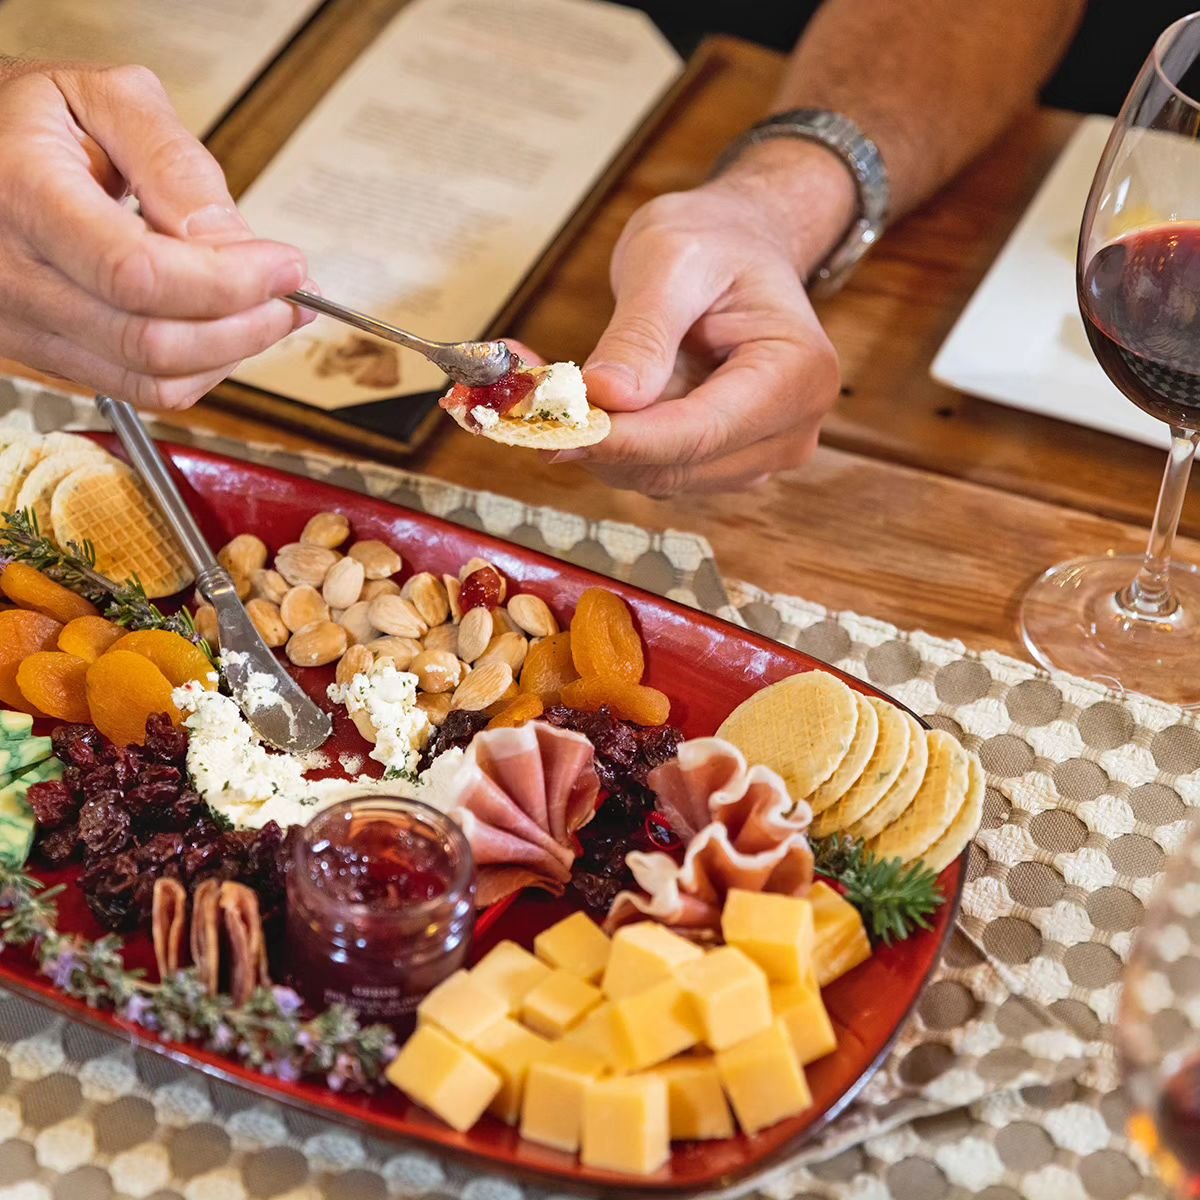 Bring sophistication and deliciousness to your 4th of July, graduation, or Father&rsquo;s Day celebrations by learning the art of creating a charcuterie masterpiece. Think artisanal cheeses, fresh seasonal fruits, gourmet meats - all perfectly paired